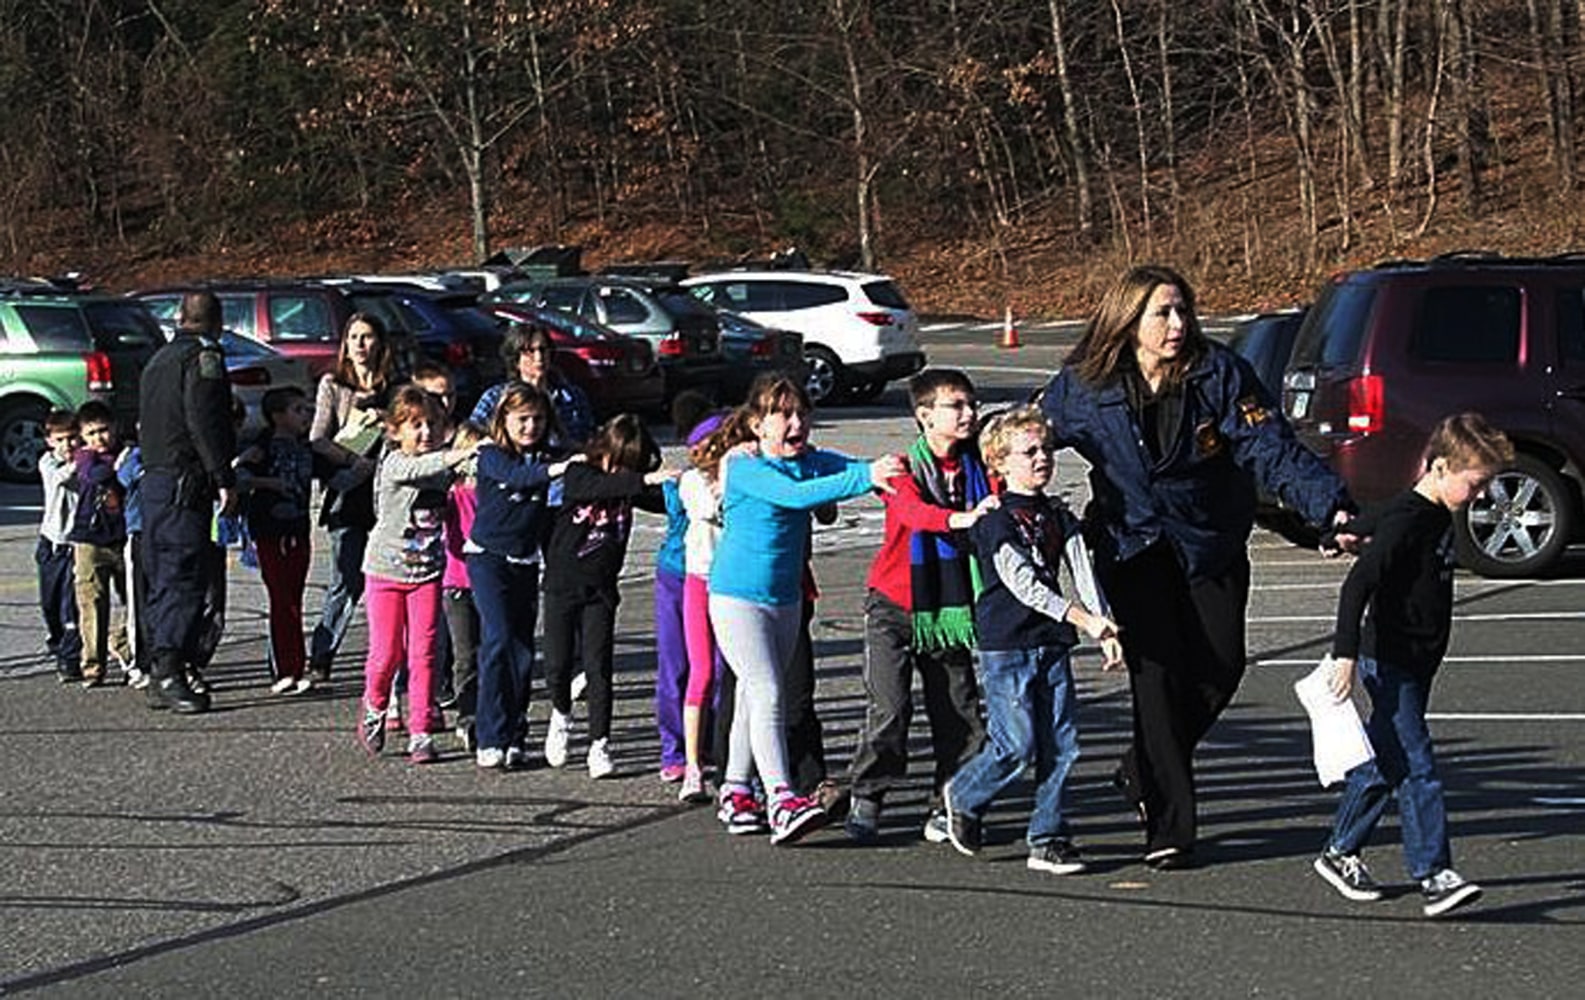 Remembering the 26: how families honor Sandy Hook victims five years later